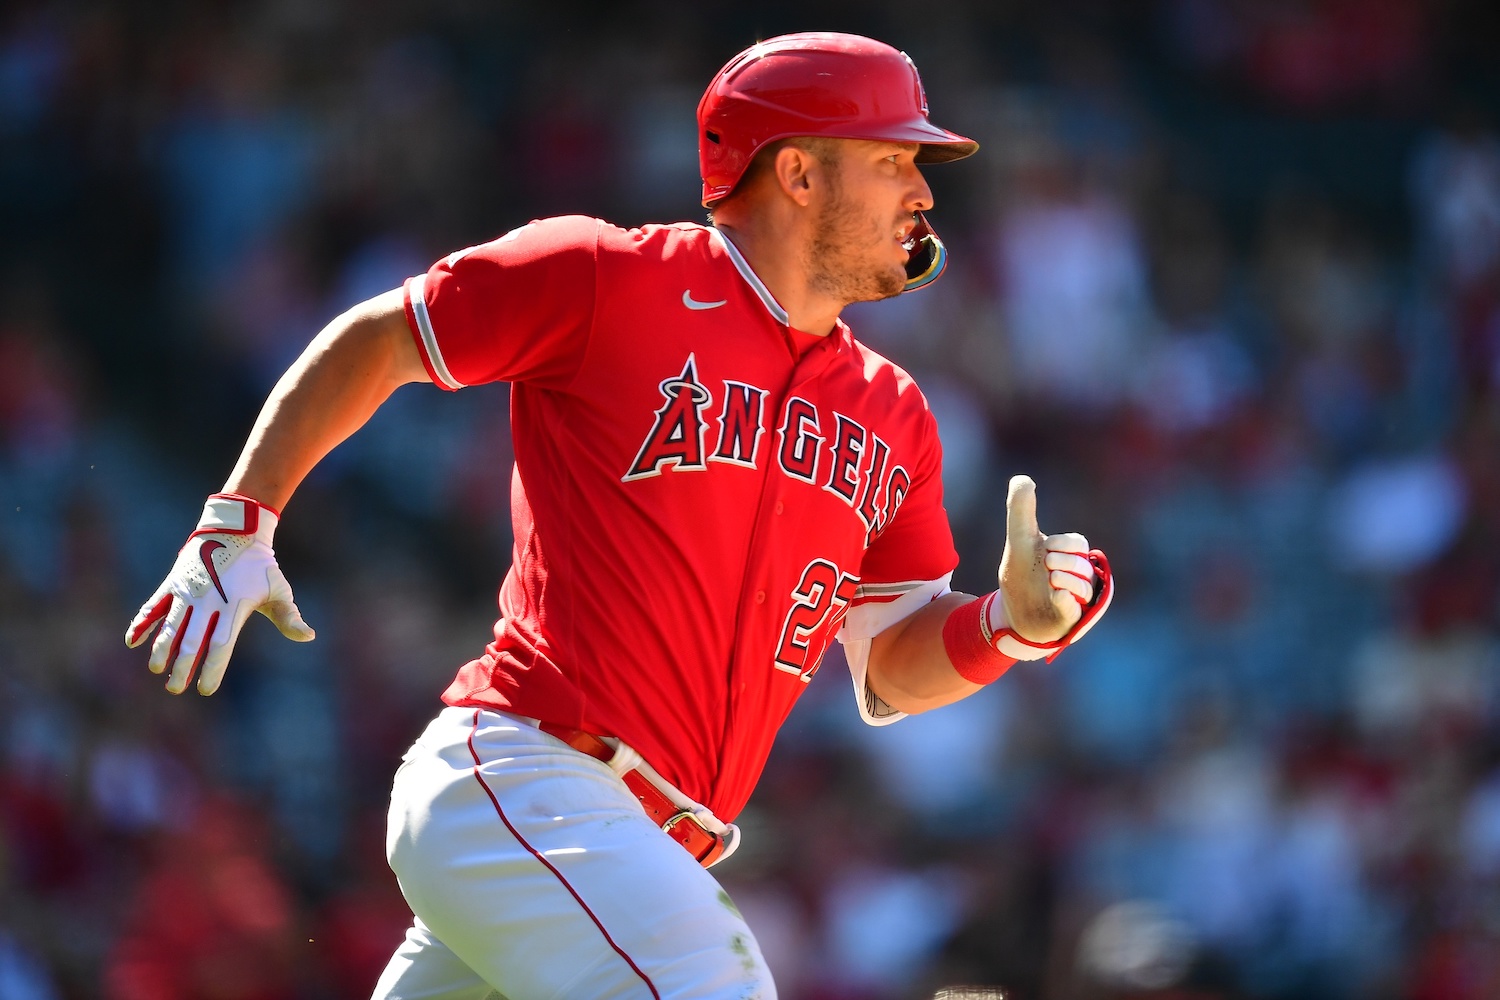 Los Angeles Angels Star Mike Trout Won't Play Again This Year